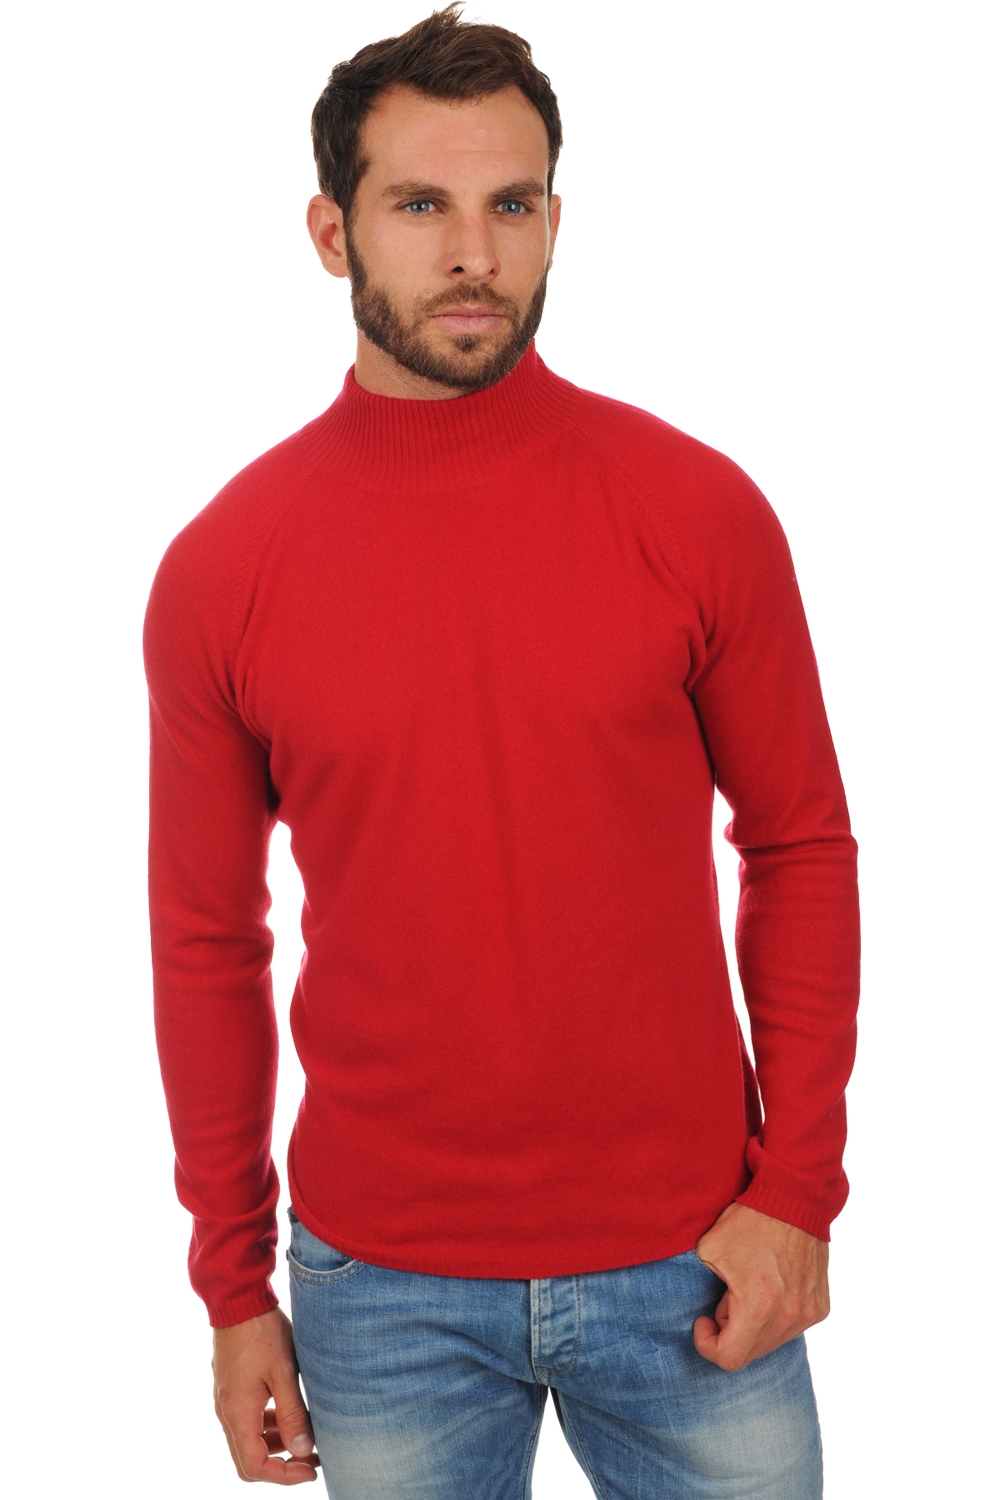 Cashmere men timeless classics frederic blood red 4xl